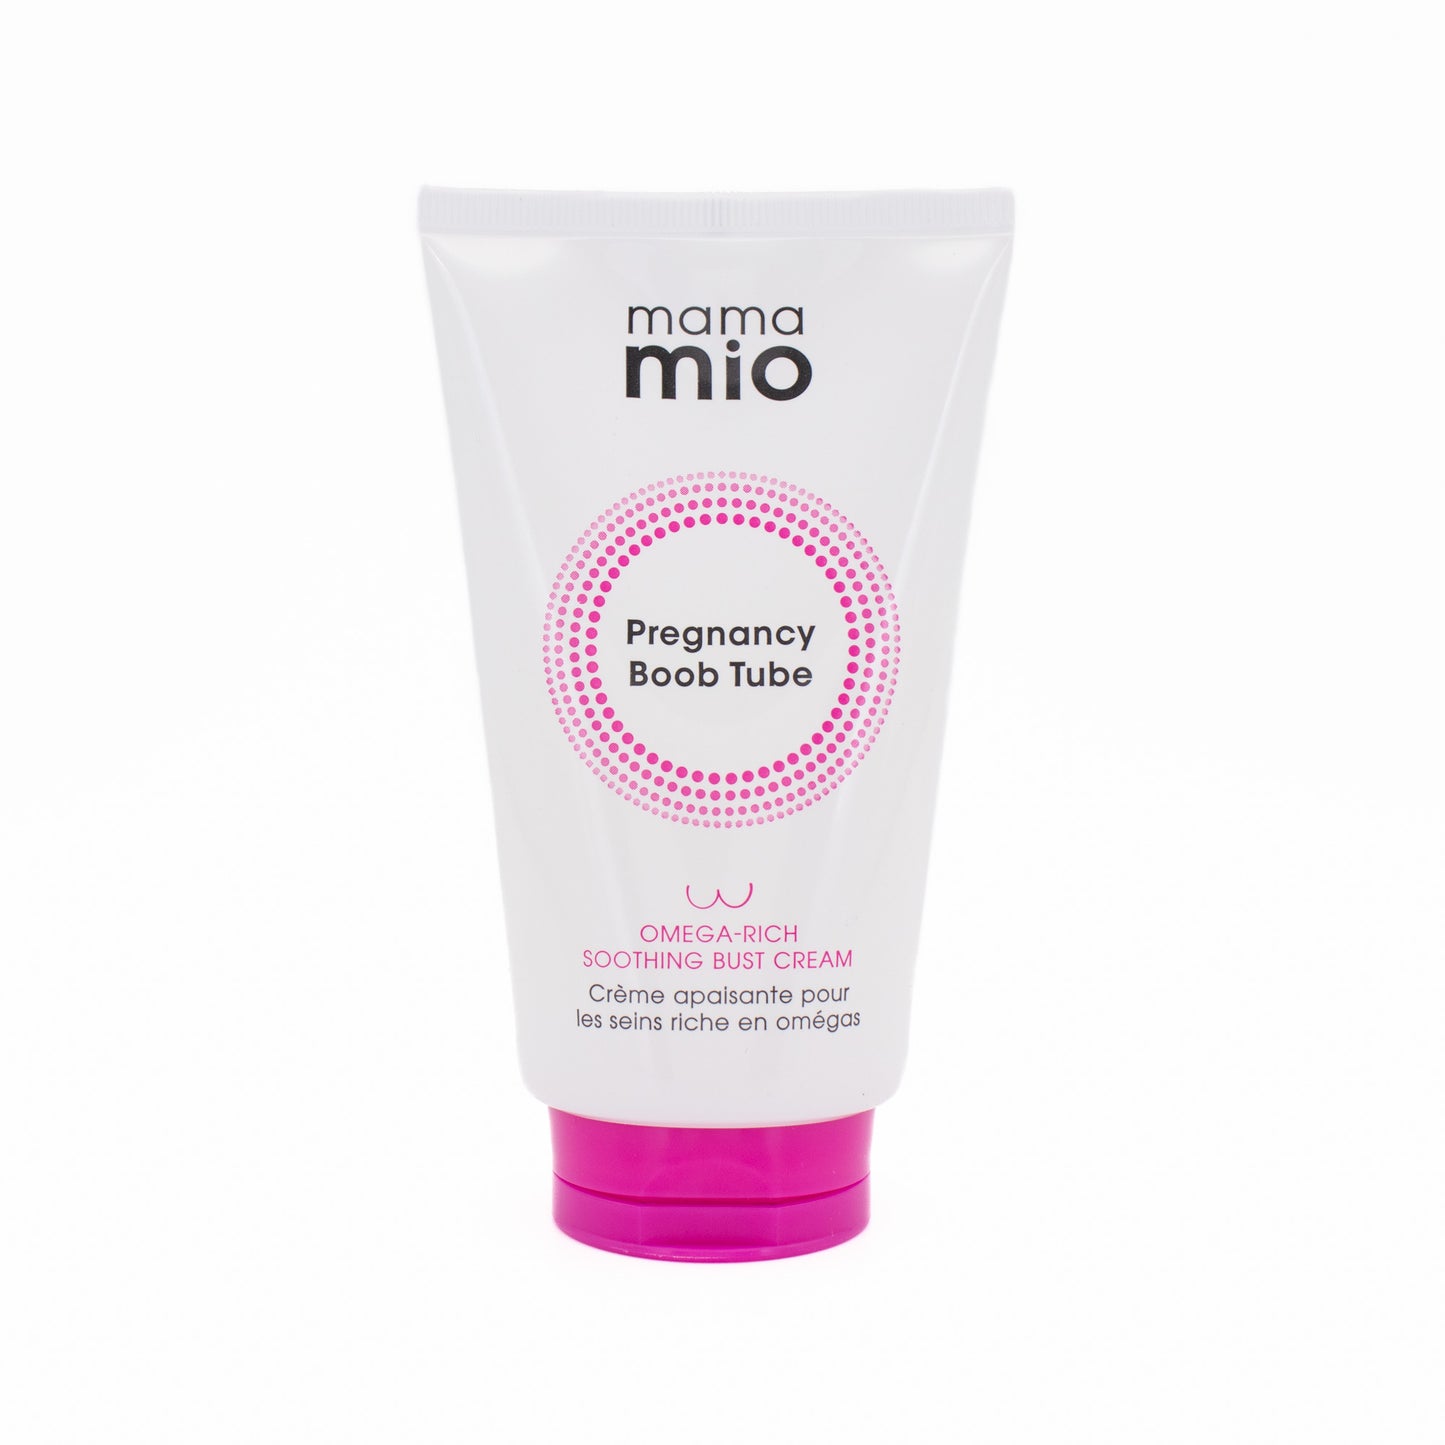 Mama Mio Pregnancy Boob Tube 125ml Soothing Bust Cream - Imperfect Box - This is Beauty UK